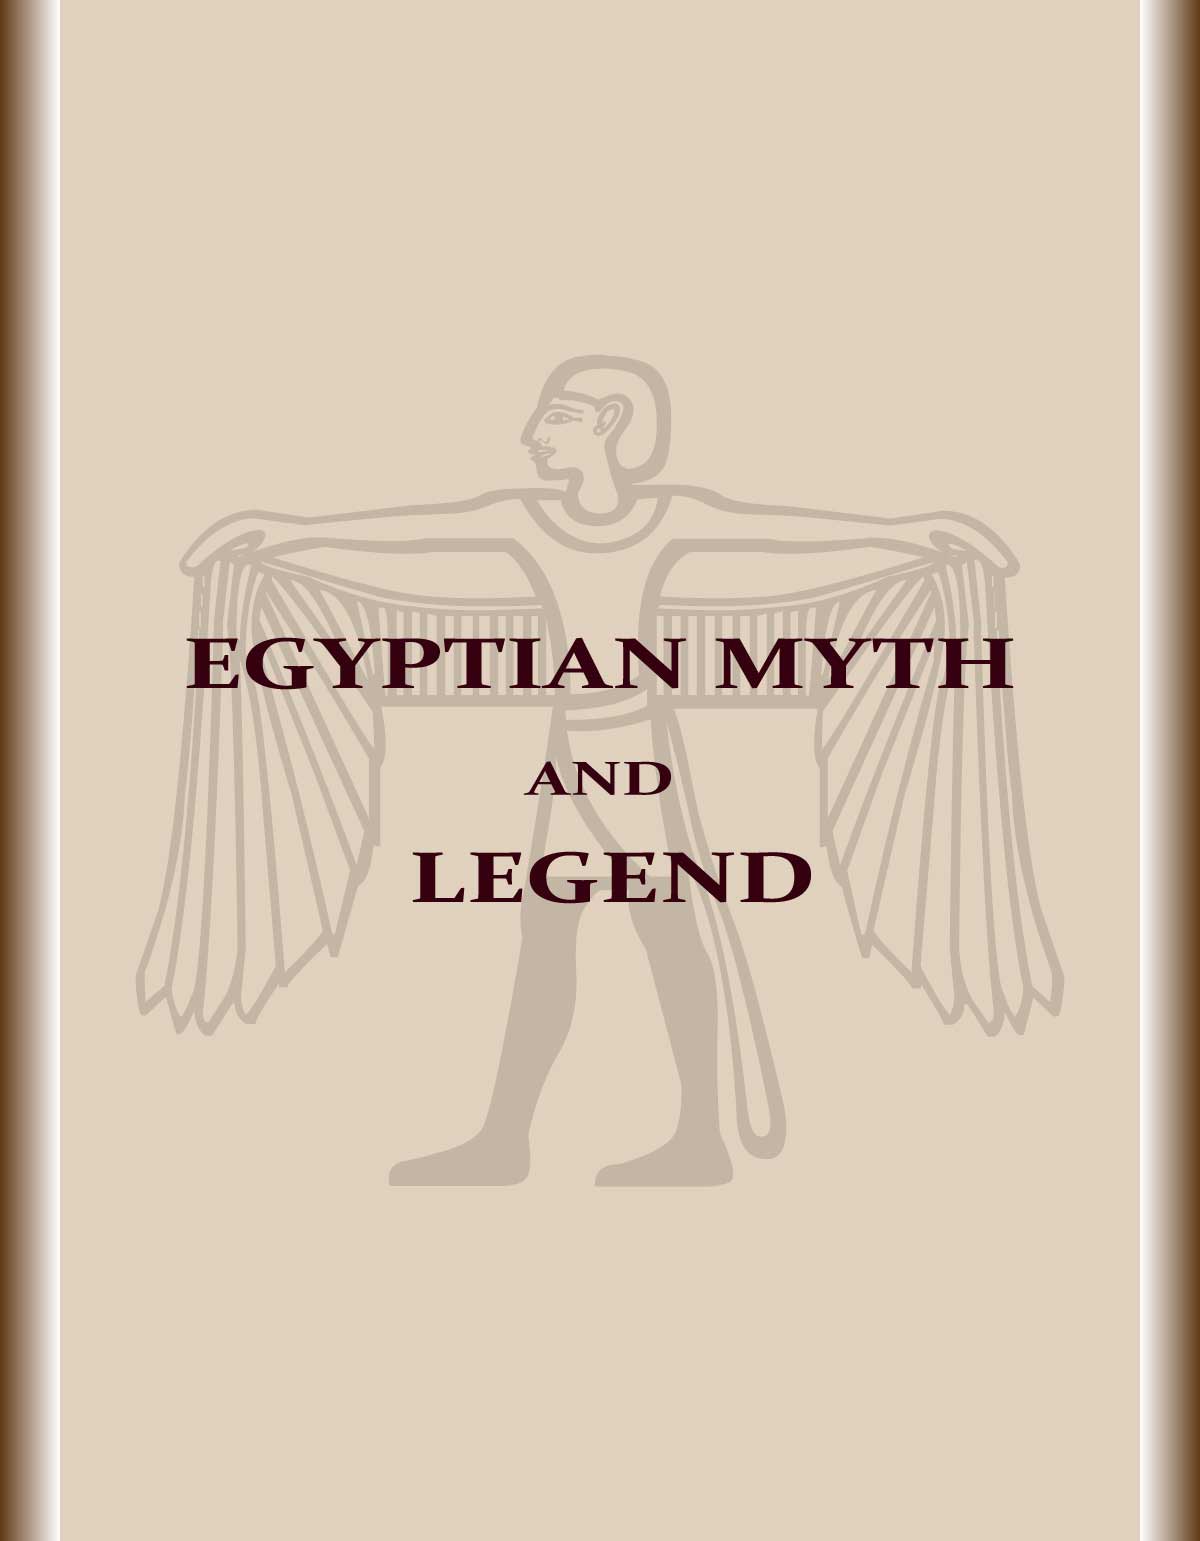 Egyptian-myth-and-legend-book-cover